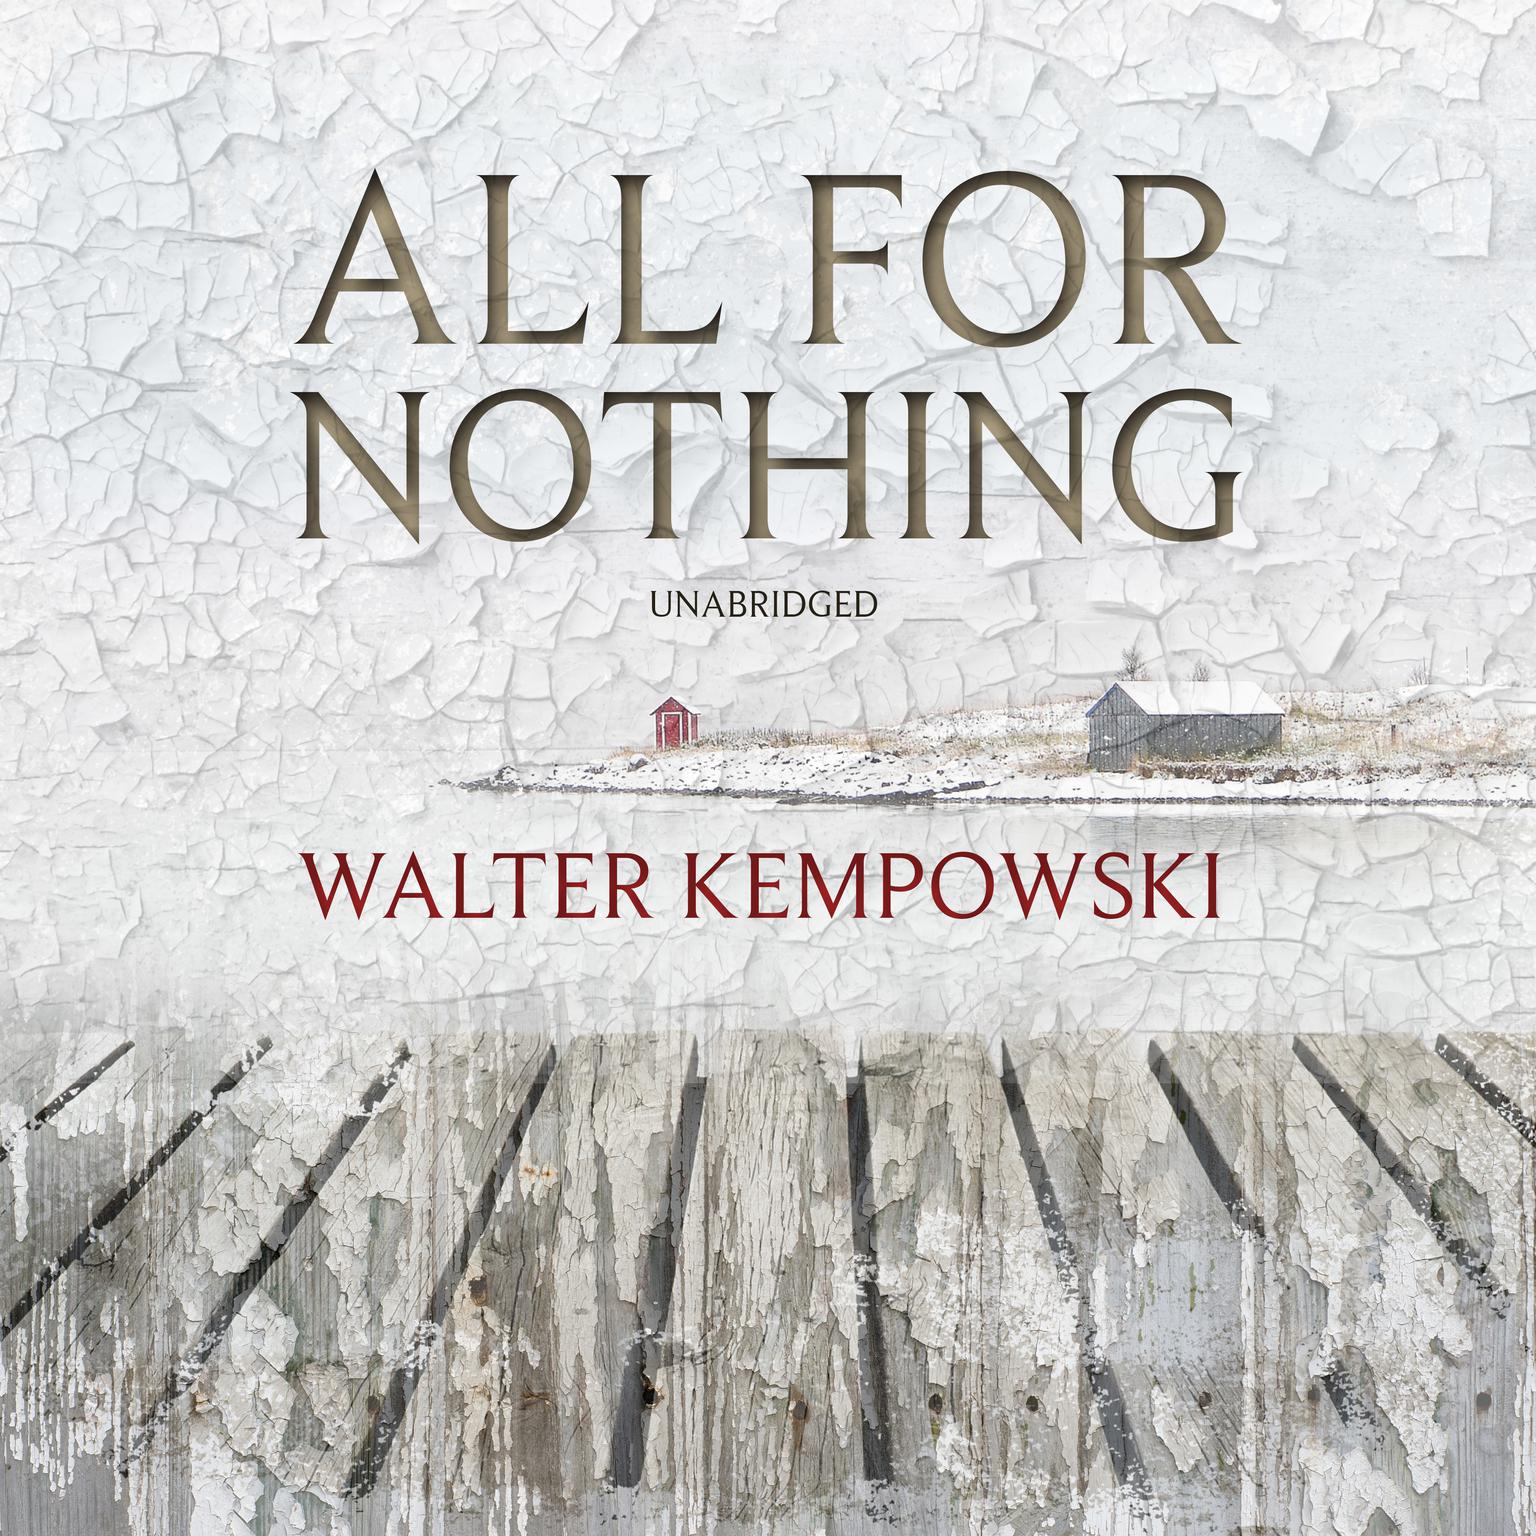 All for Nothing Audiobook, by Walter Kempowski